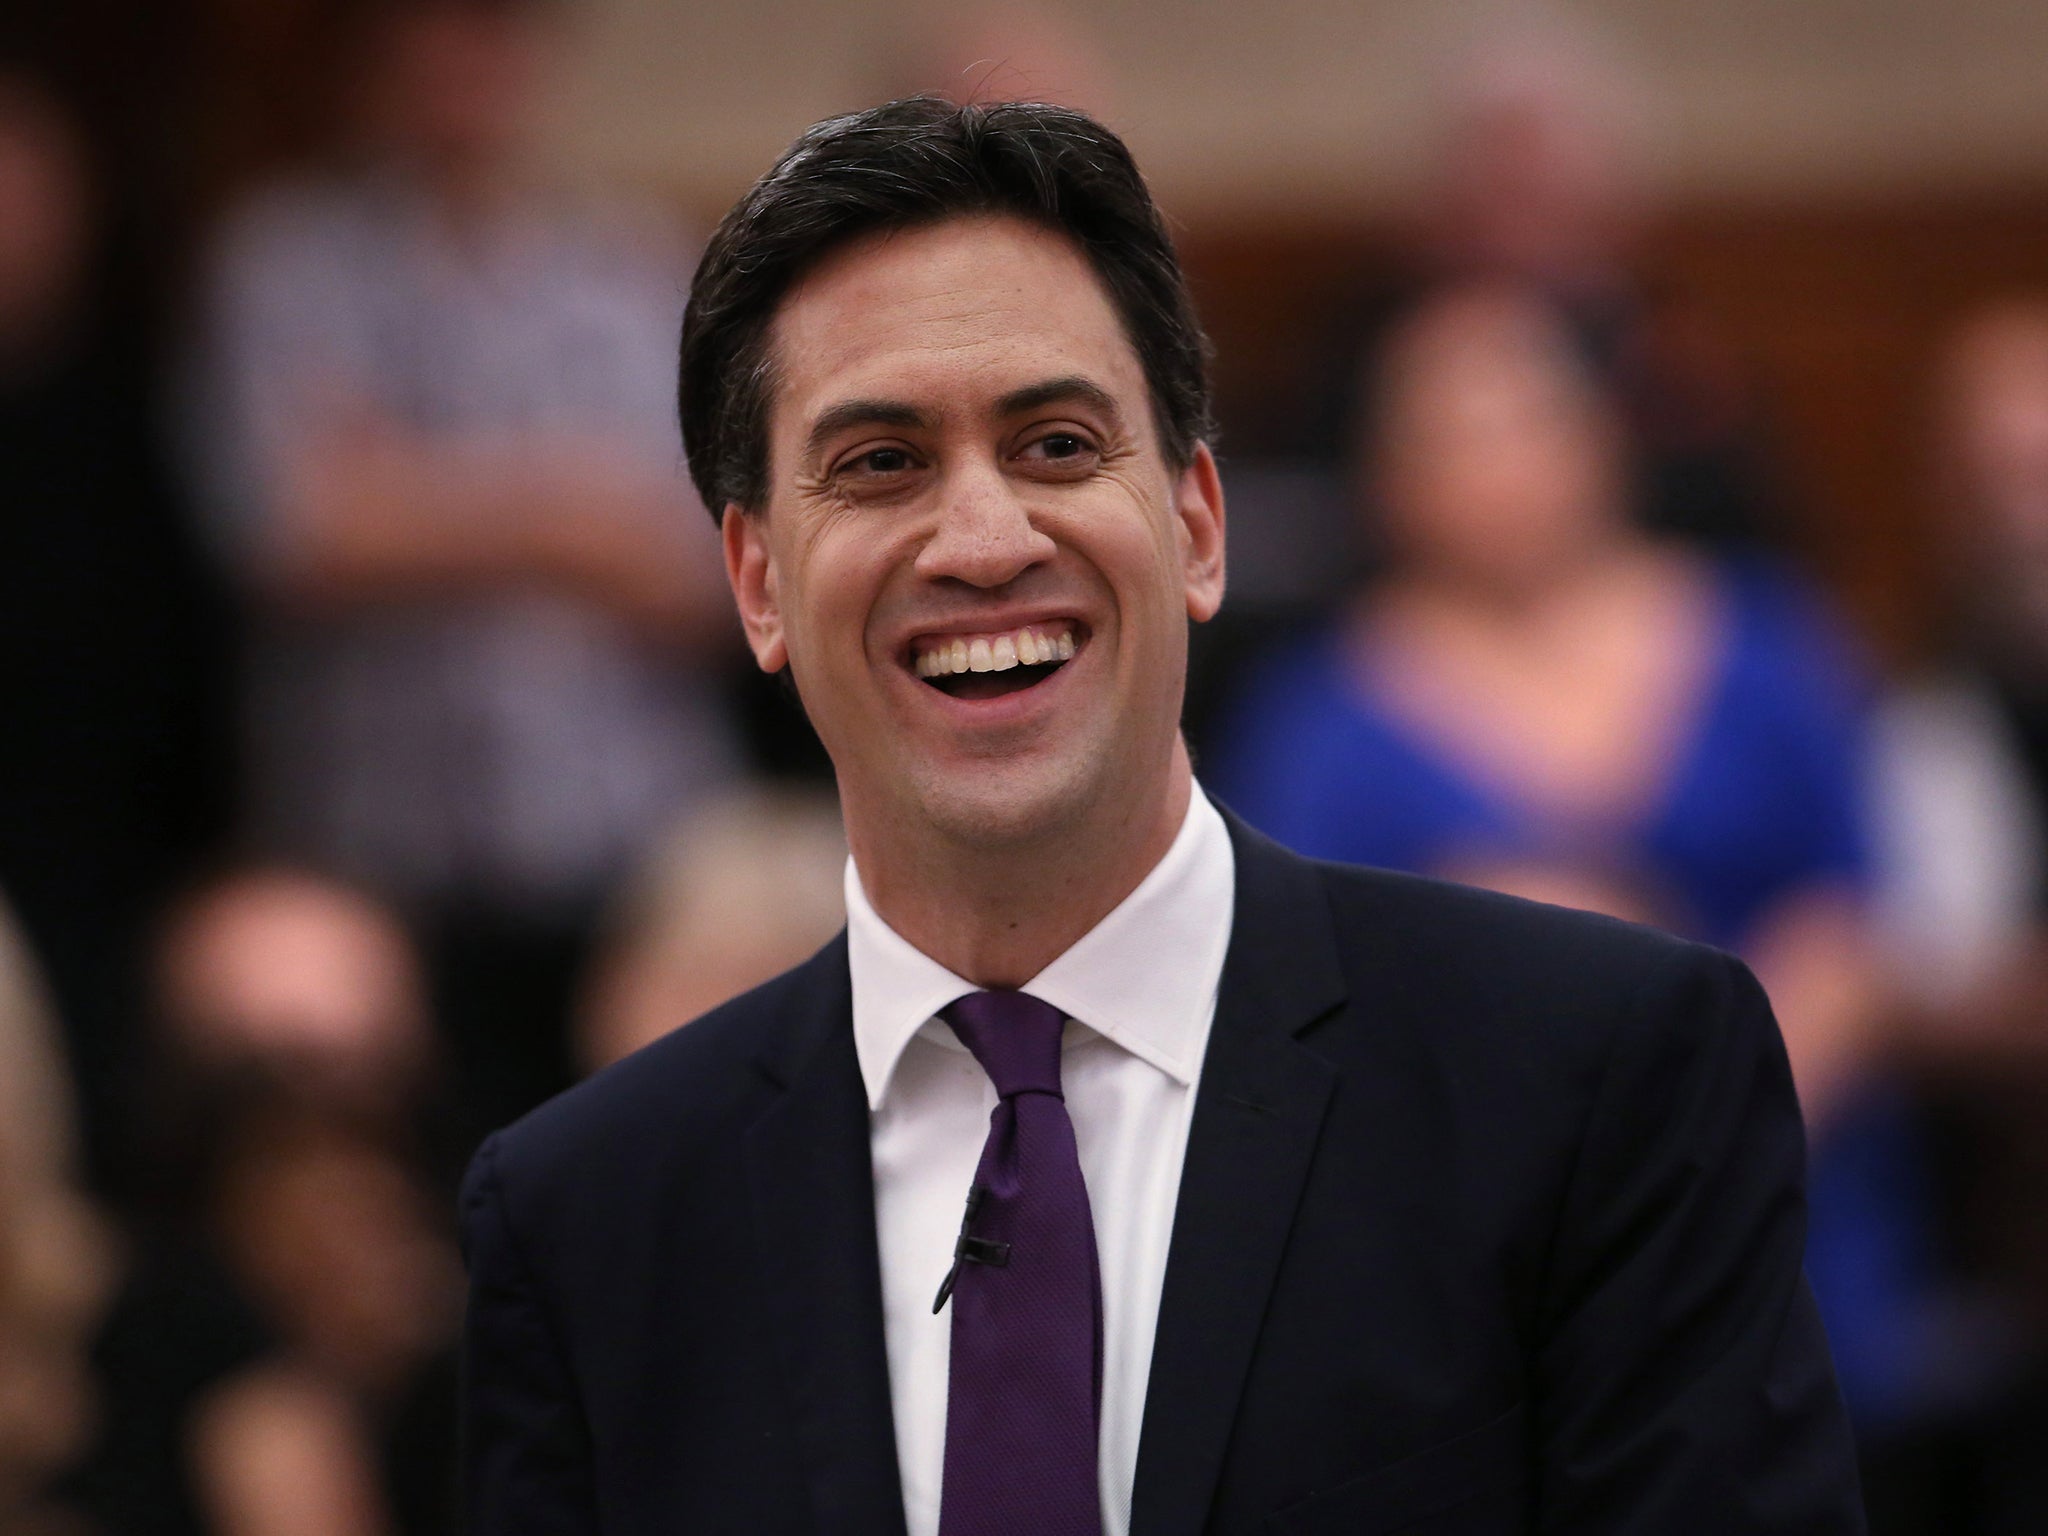 Emergence of Mr Miliband’s remarks will embarrass former leader and comes after torrid week for Mr Corbyn